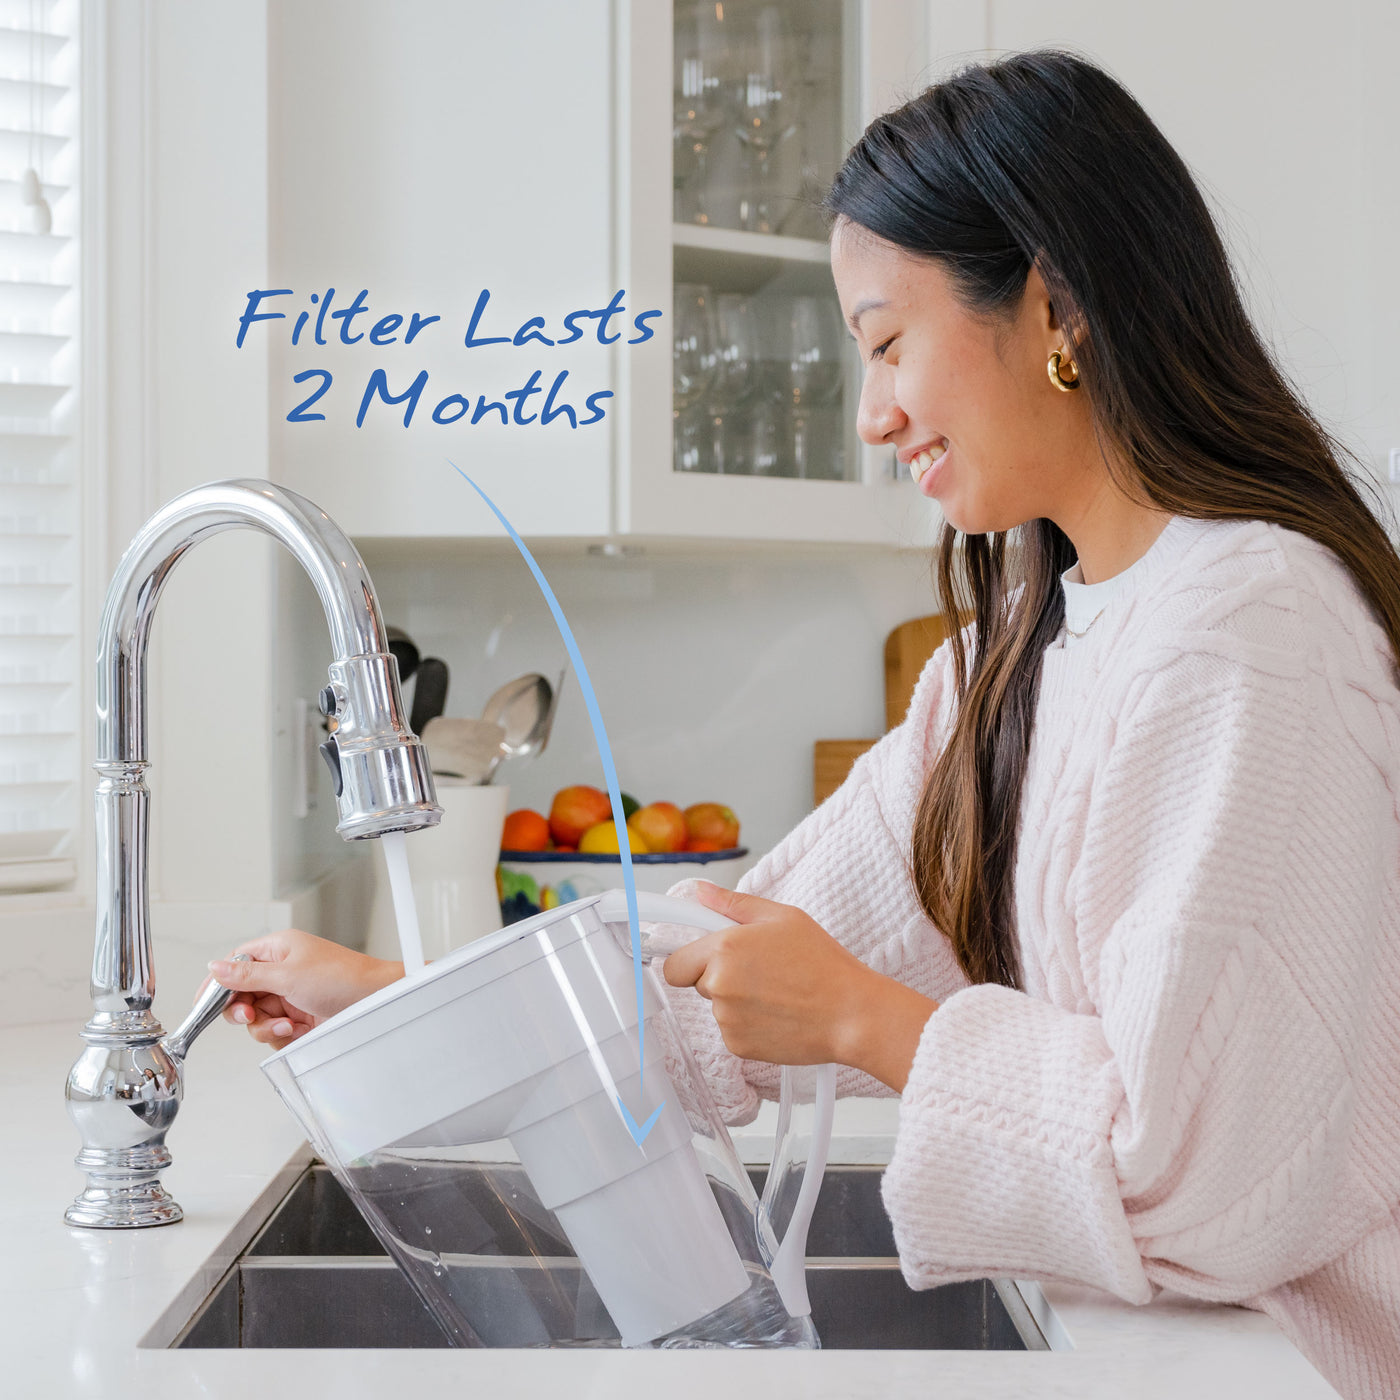 The Santevia MINA Alkaline Pitcher filters will last for 2 months